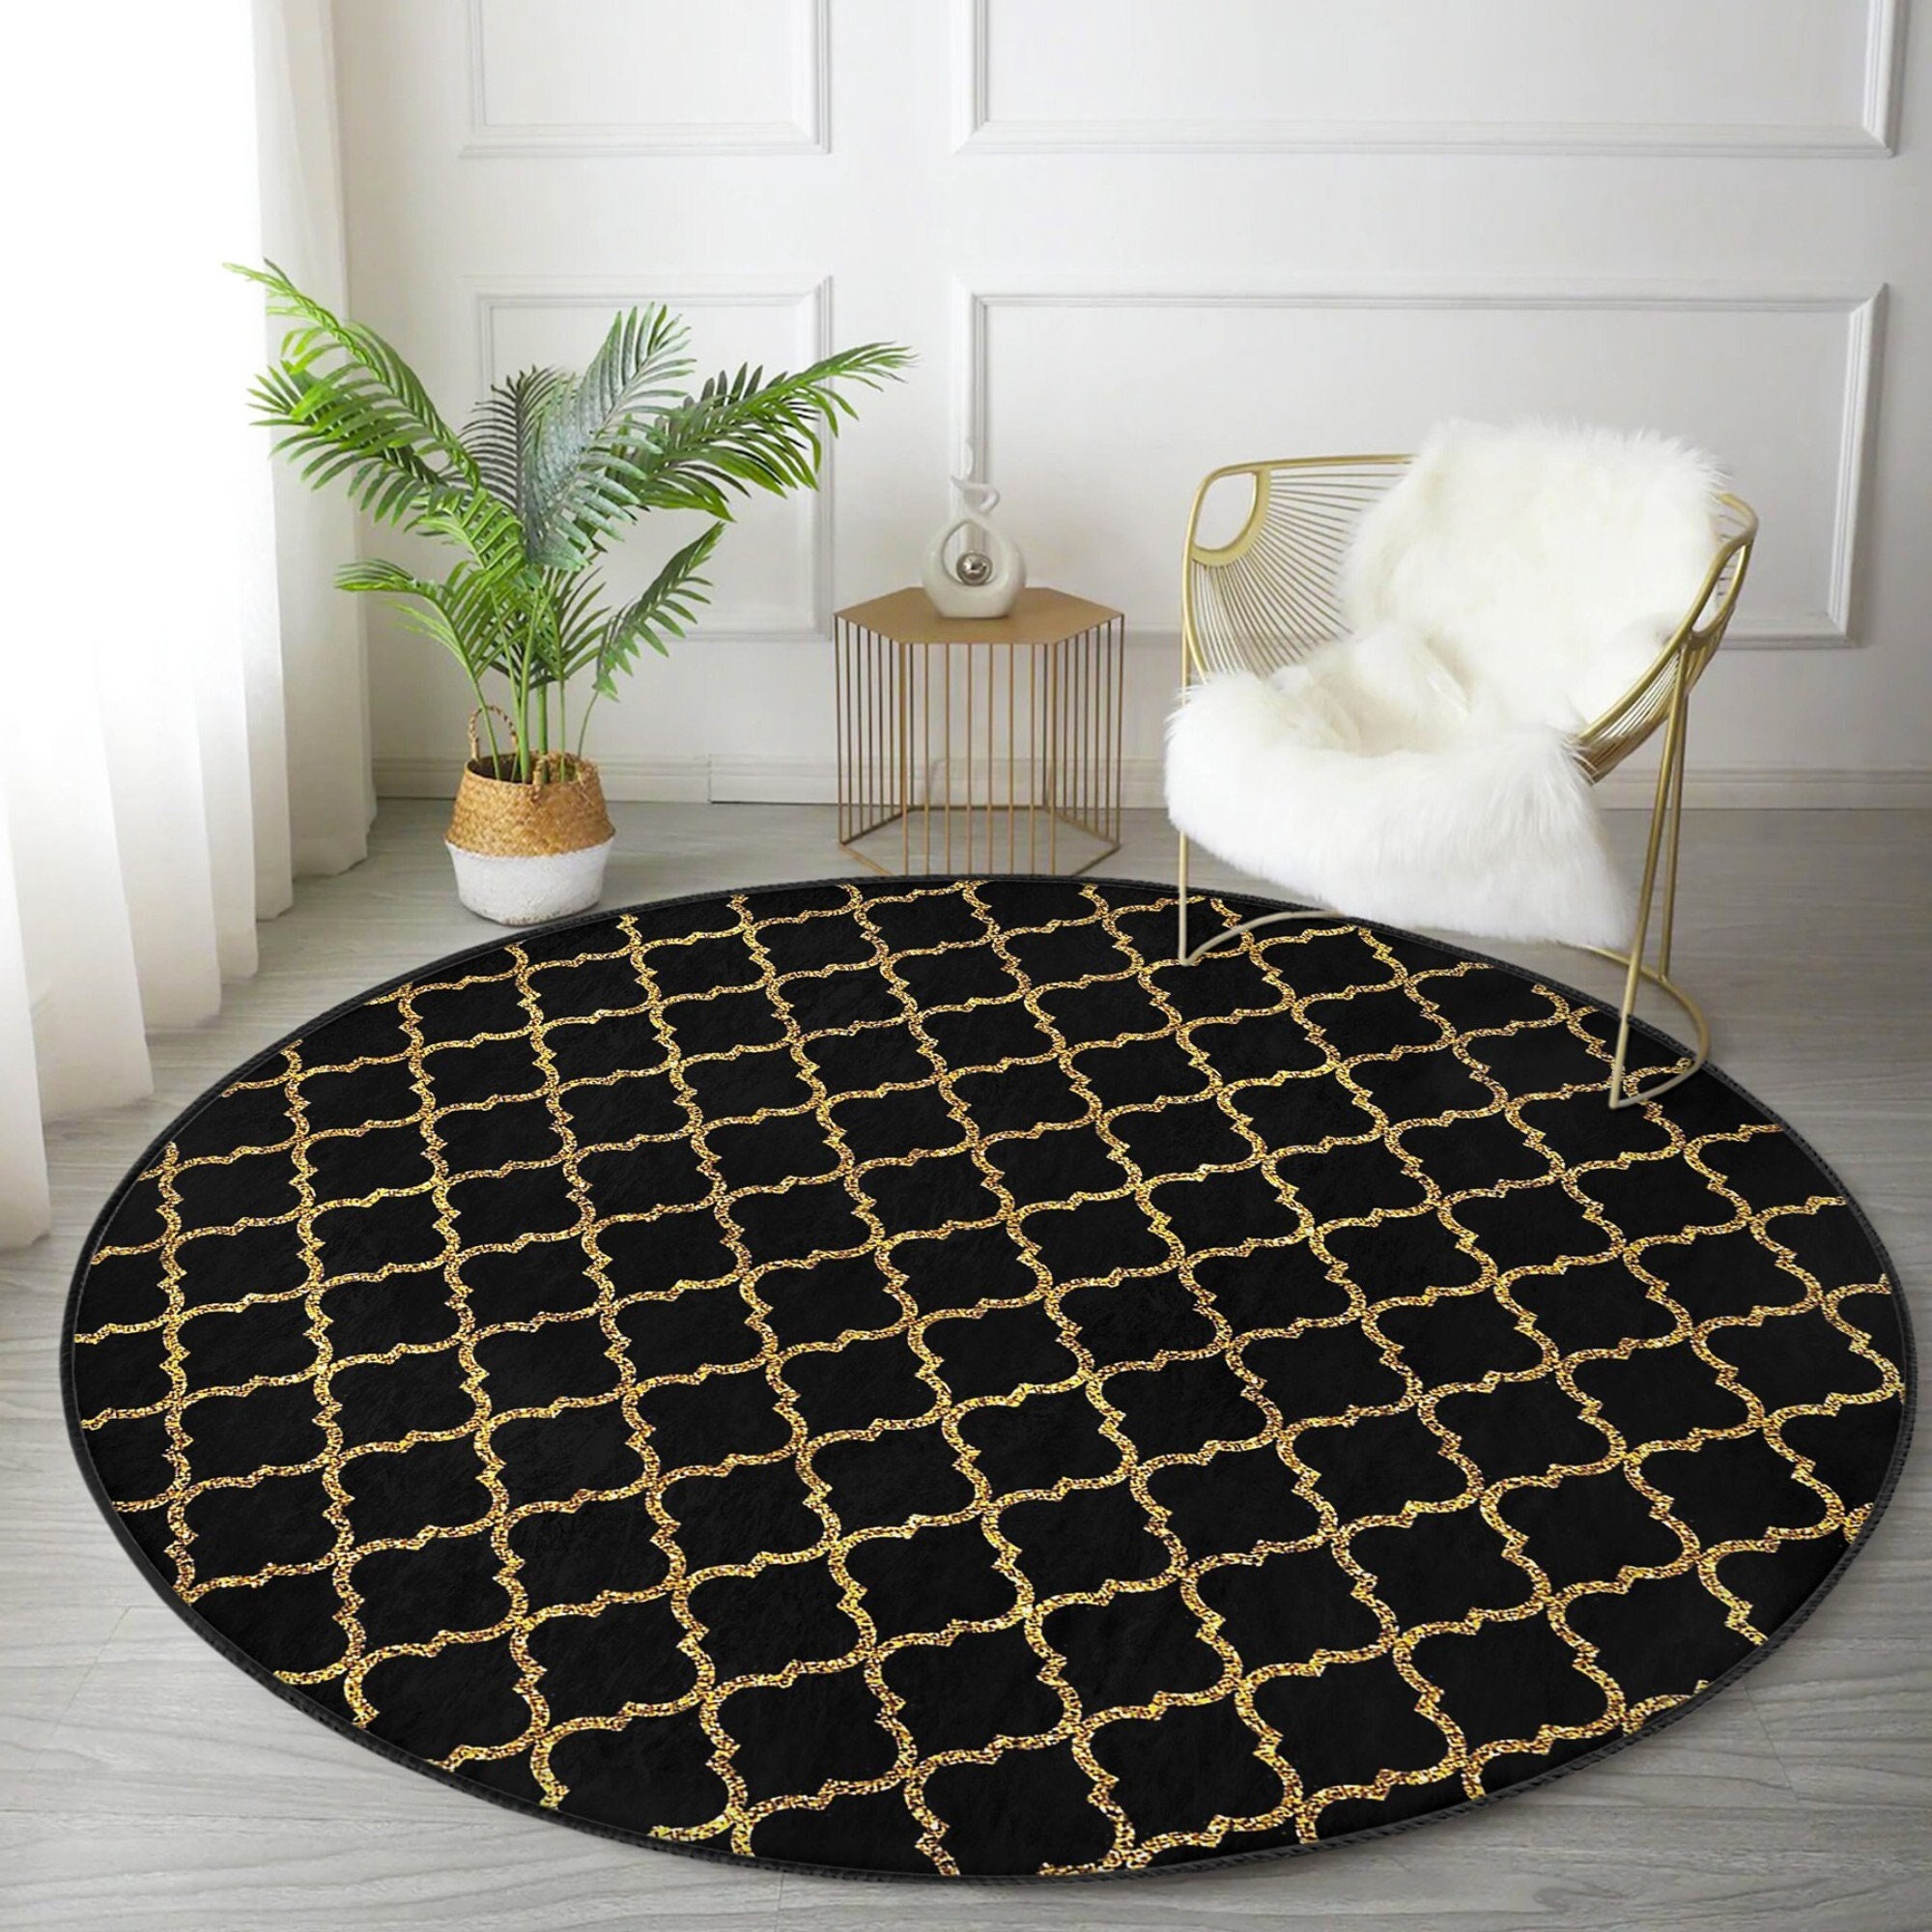 Buy Chanel Carpet Online In India -  India